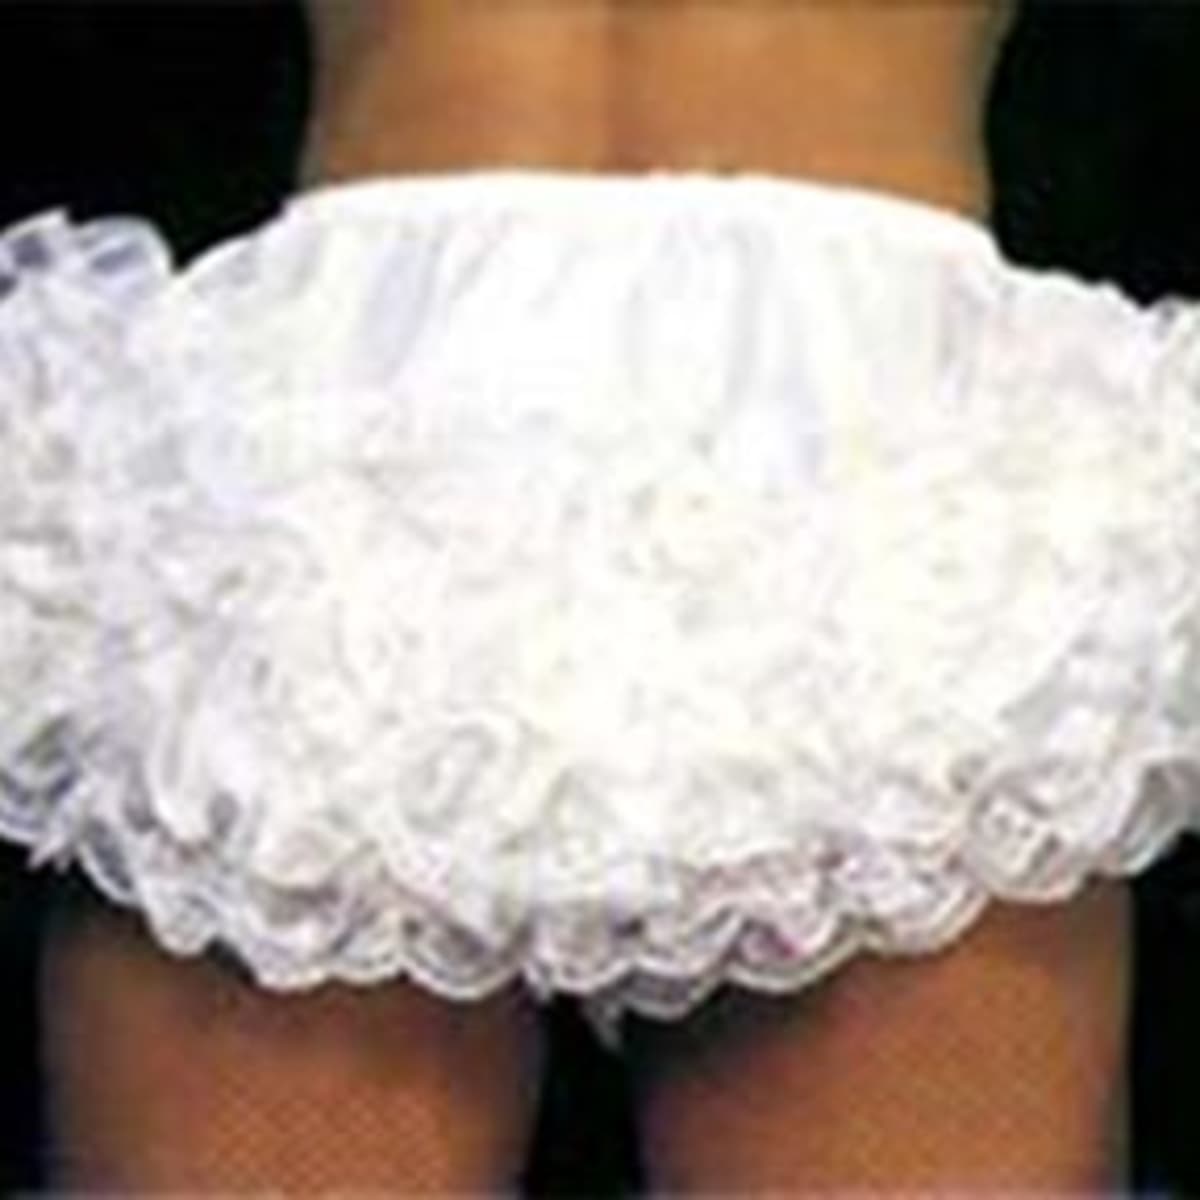 Do some women not wearing regular panties because of the visible panty line  (V.P.L) problem? - Quora